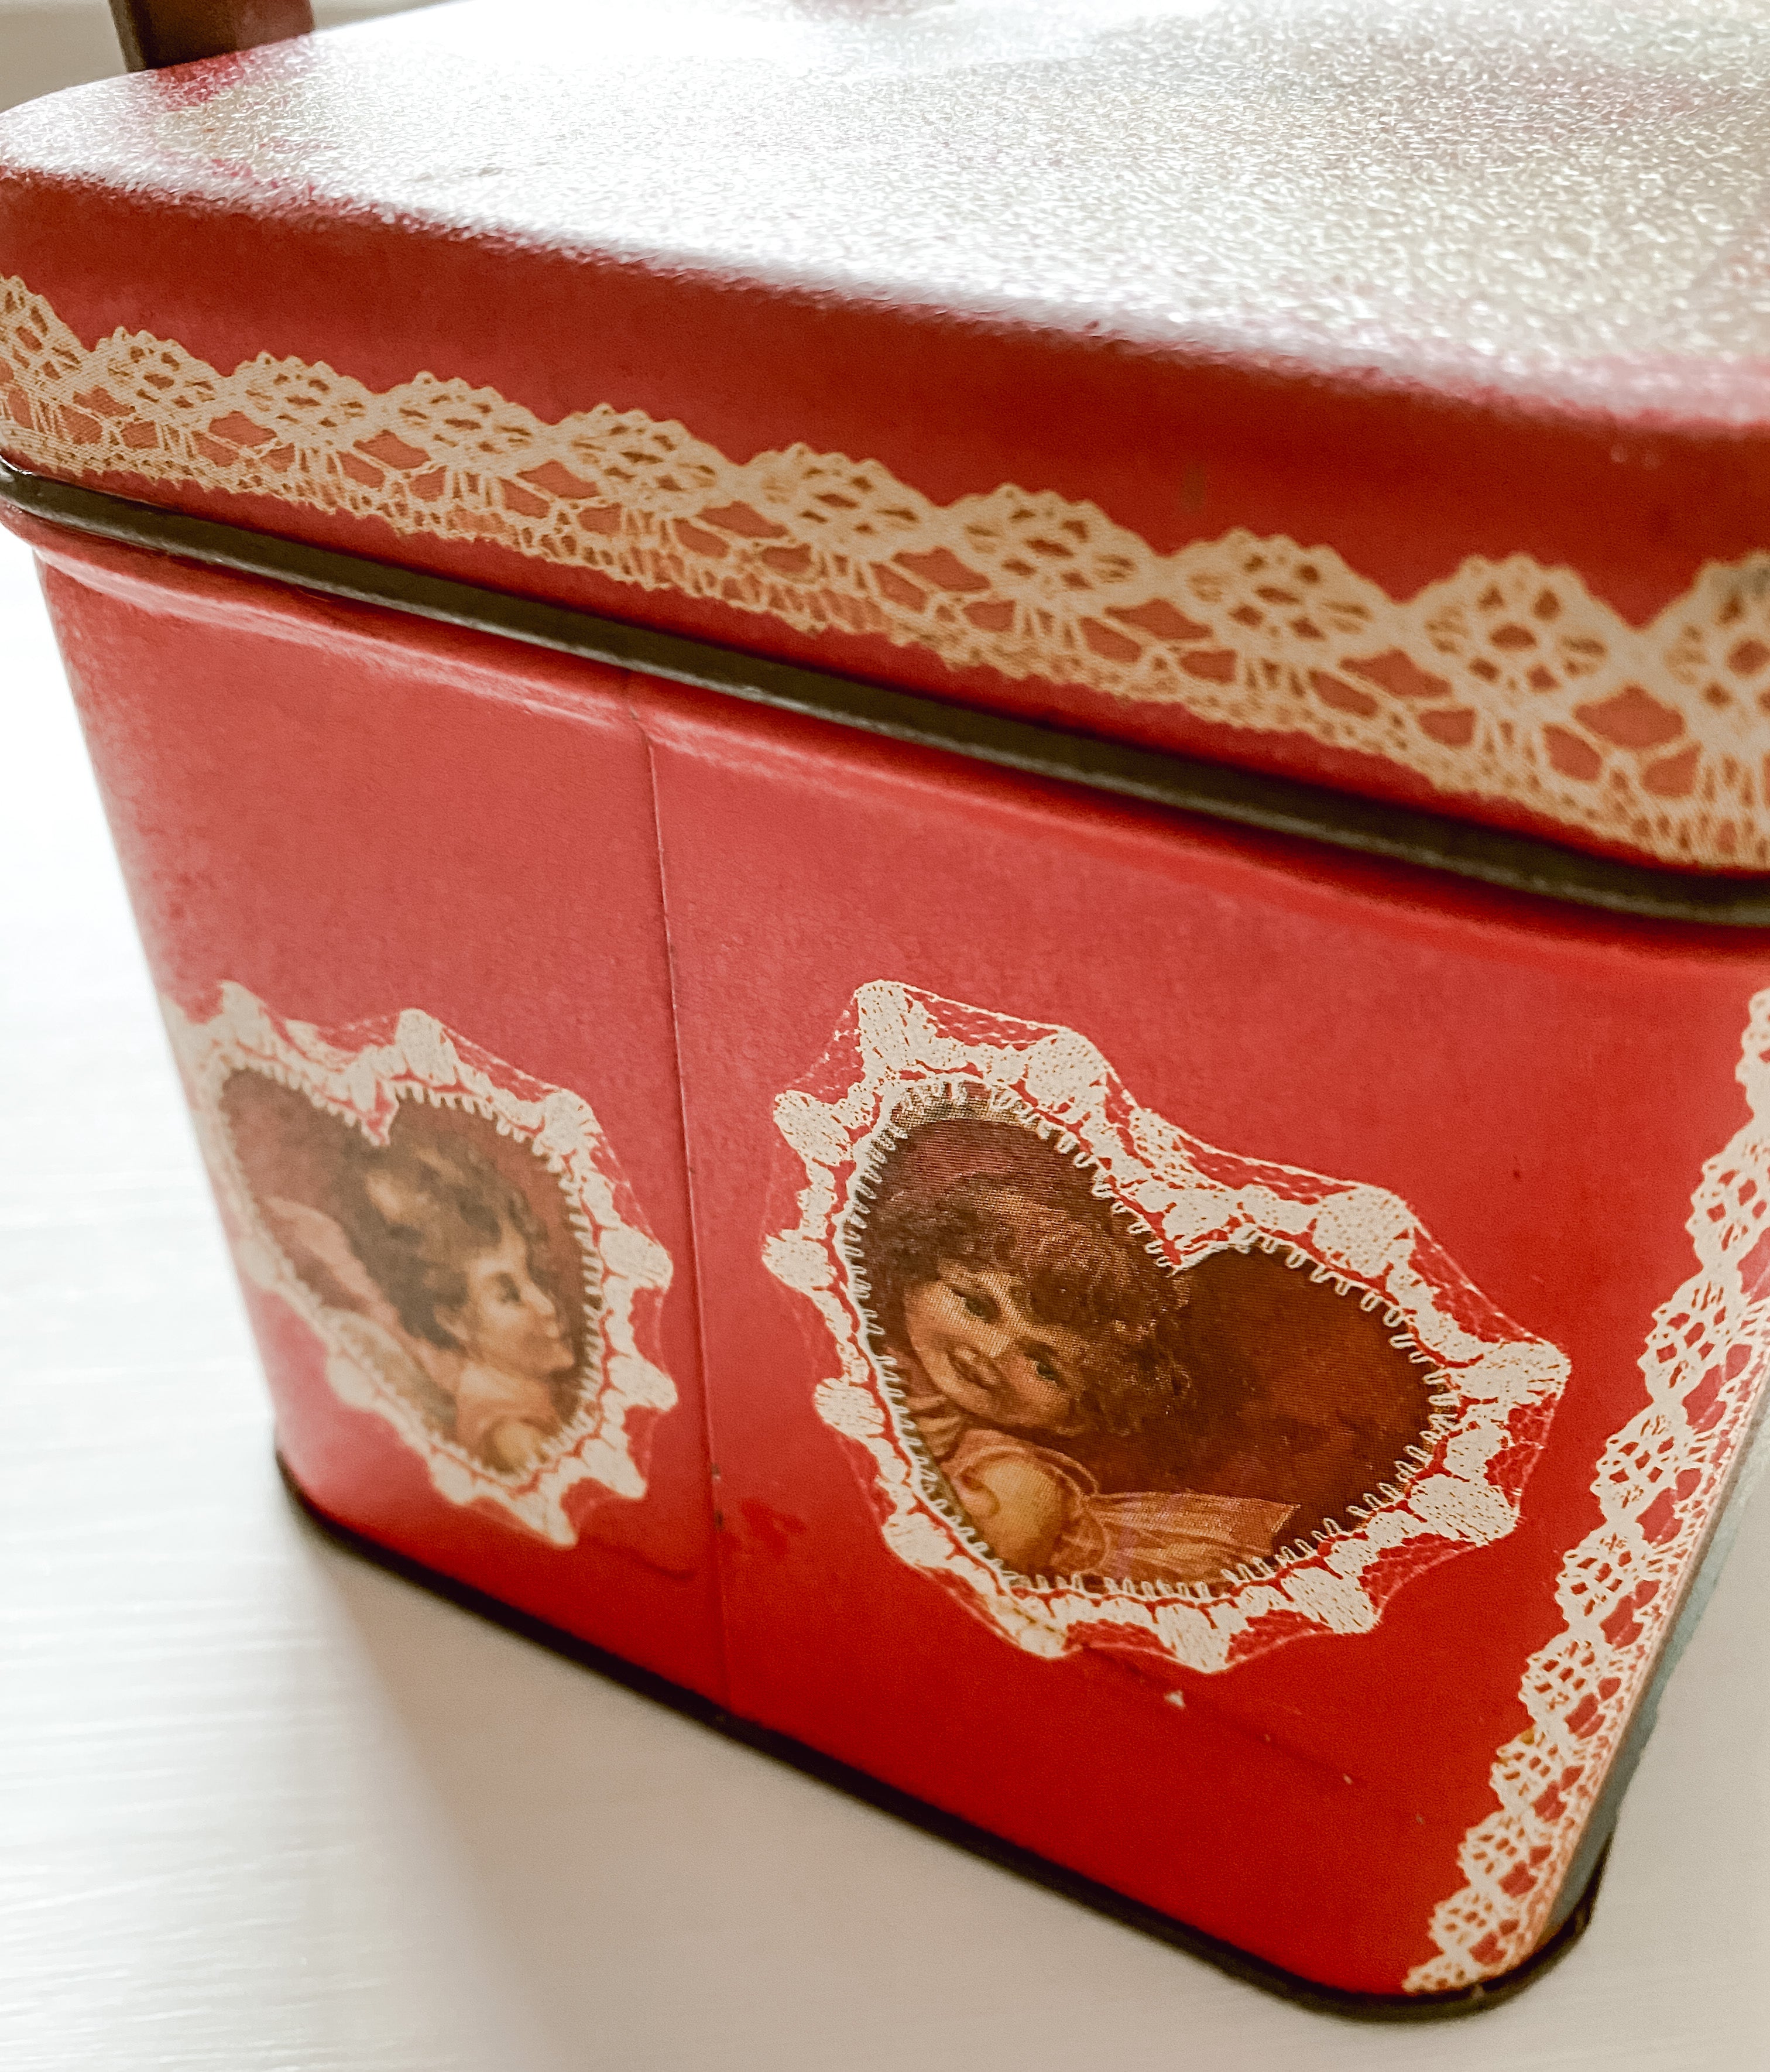 Valentine’s/Spring Greetings Tin Container